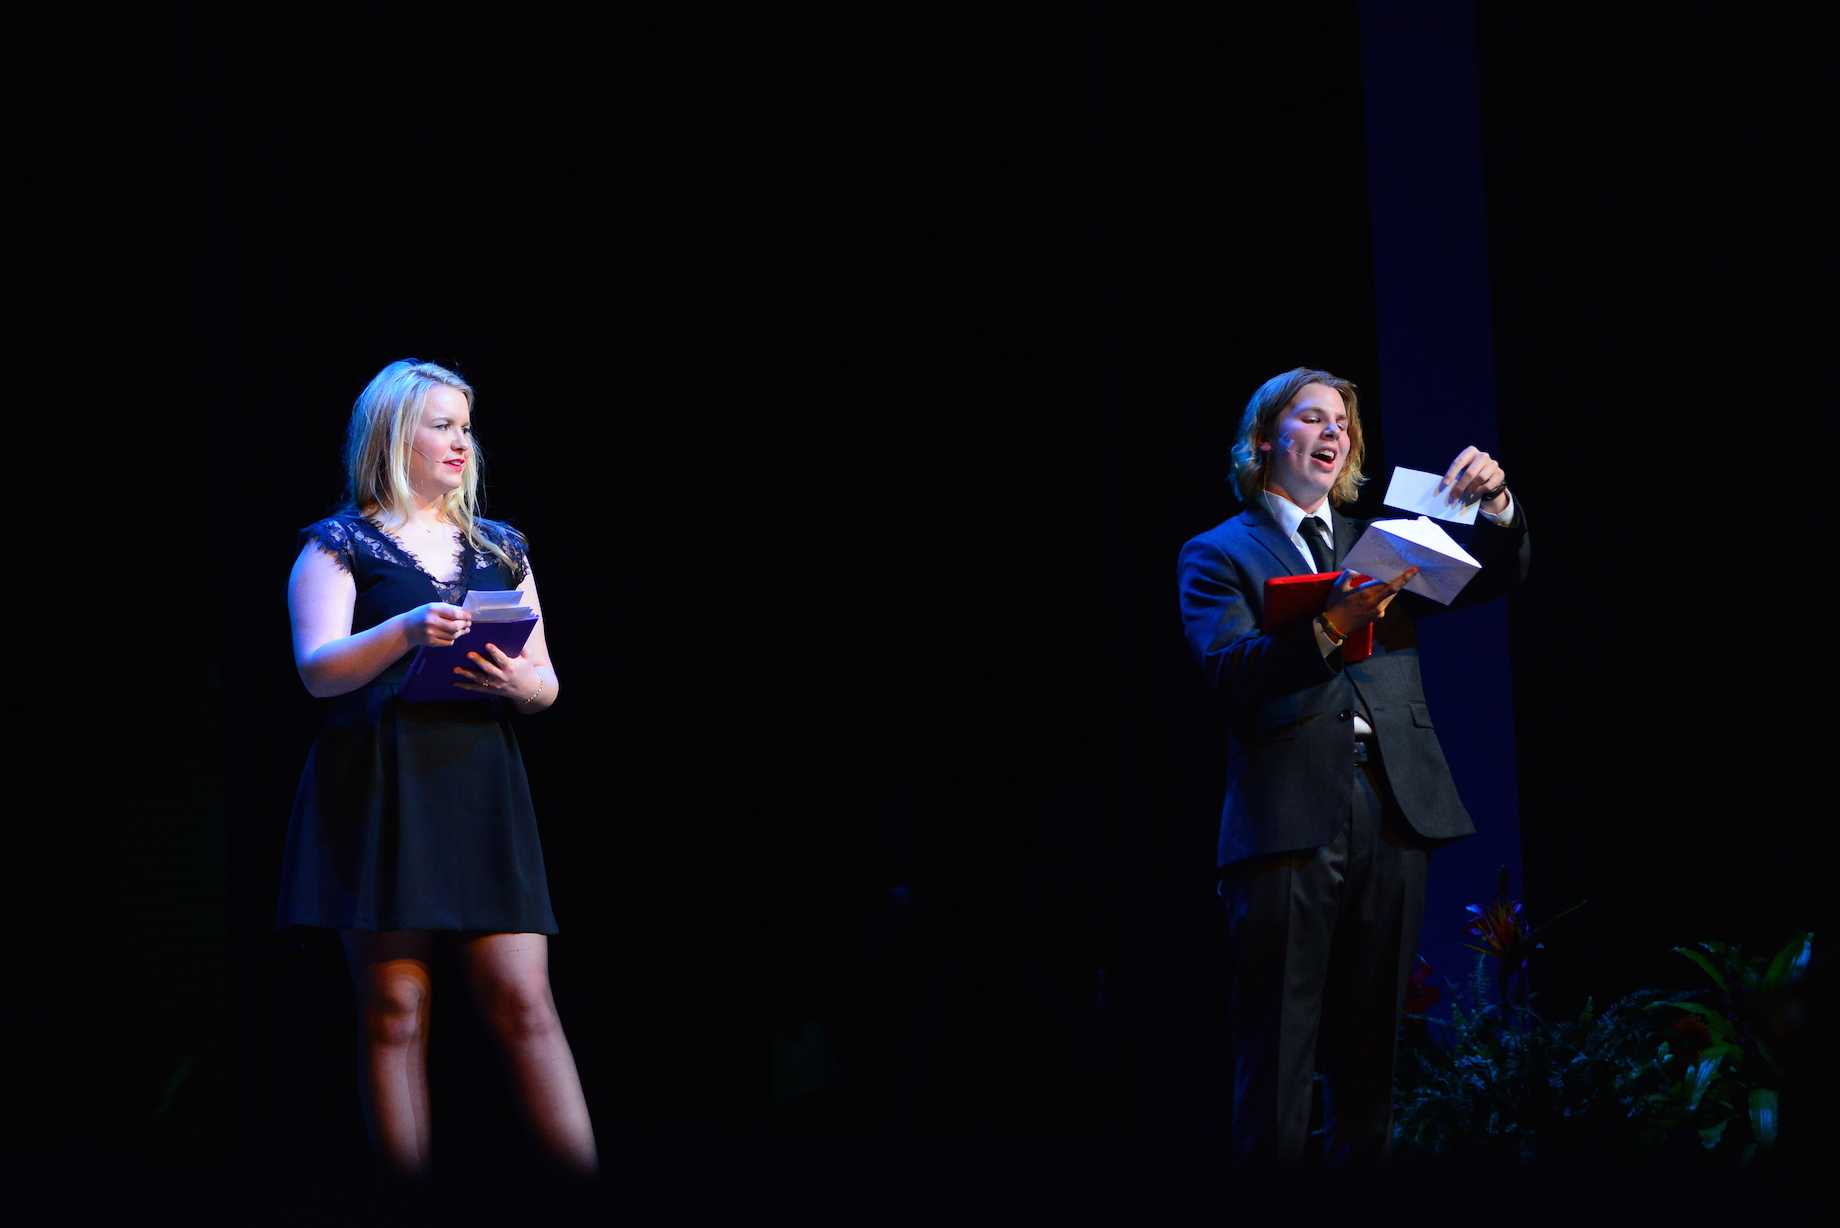 (photo courtesy of Mr. Hubert Worley) Trey Box and Brooke McCulley read out the winners of awards